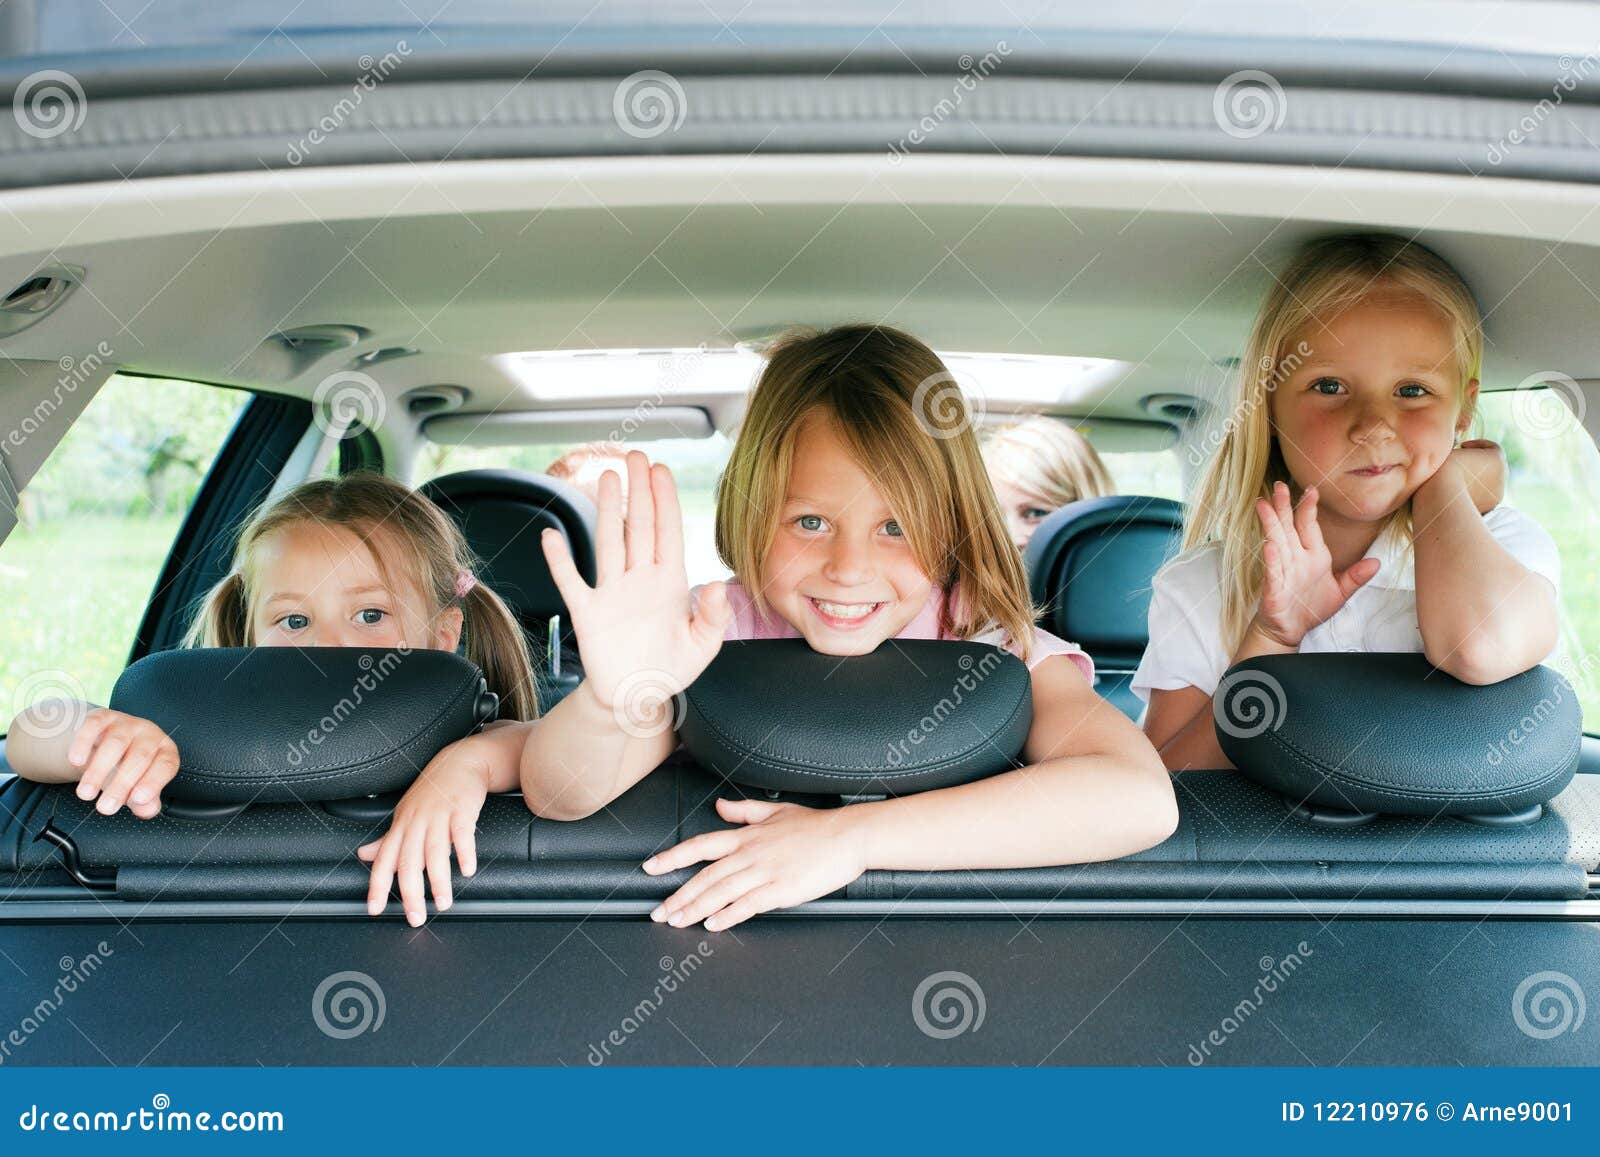 family travelling by car